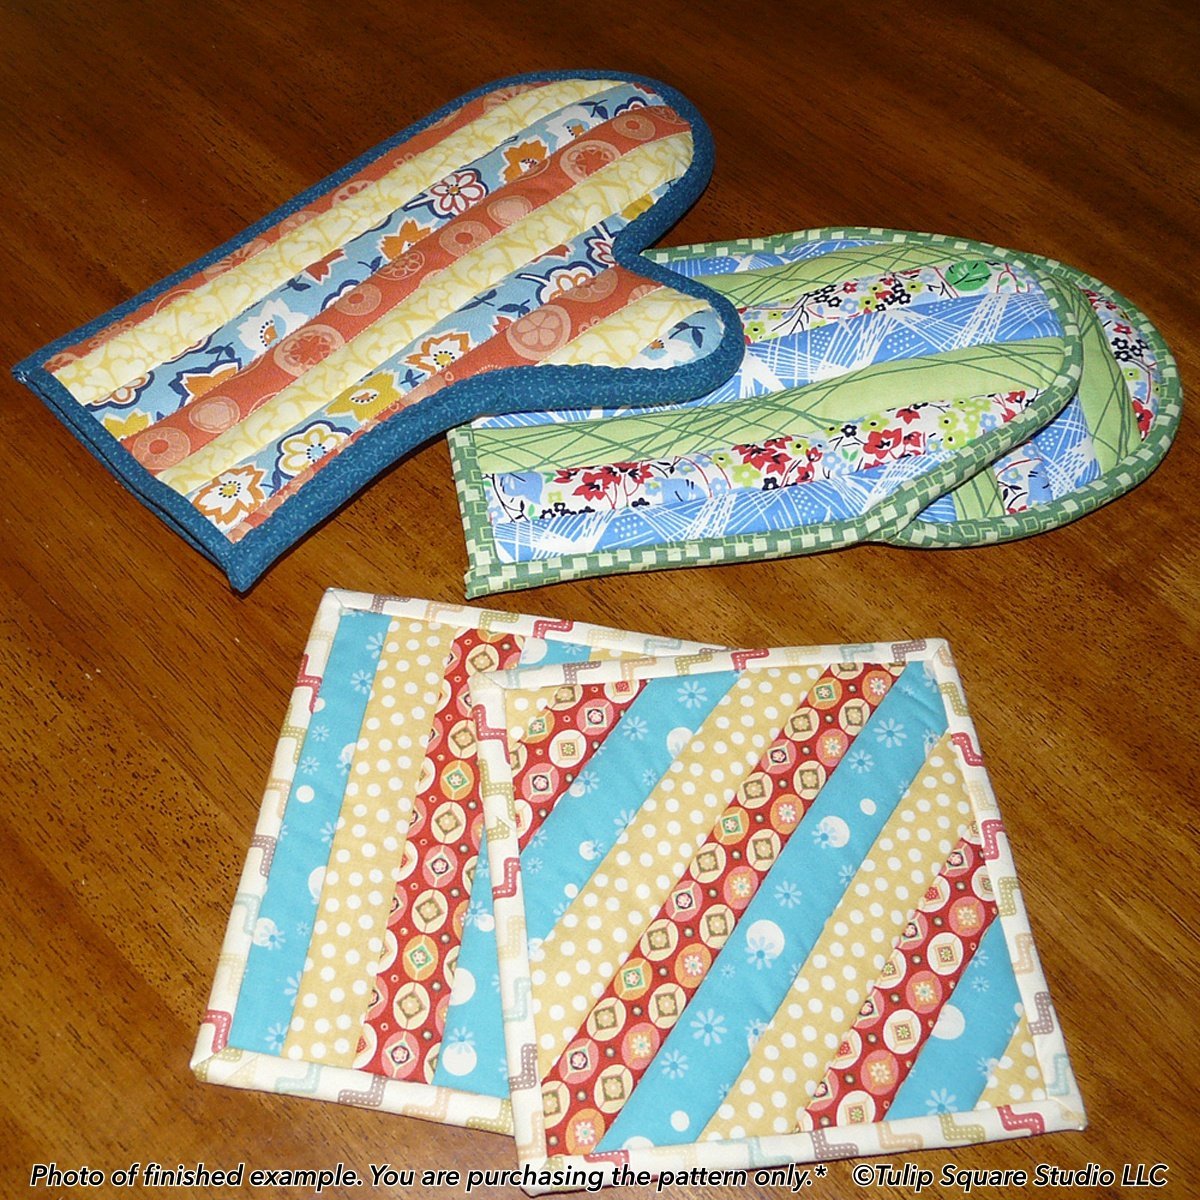 Quilt-As-You-Go Oven Mitts Pattern Download